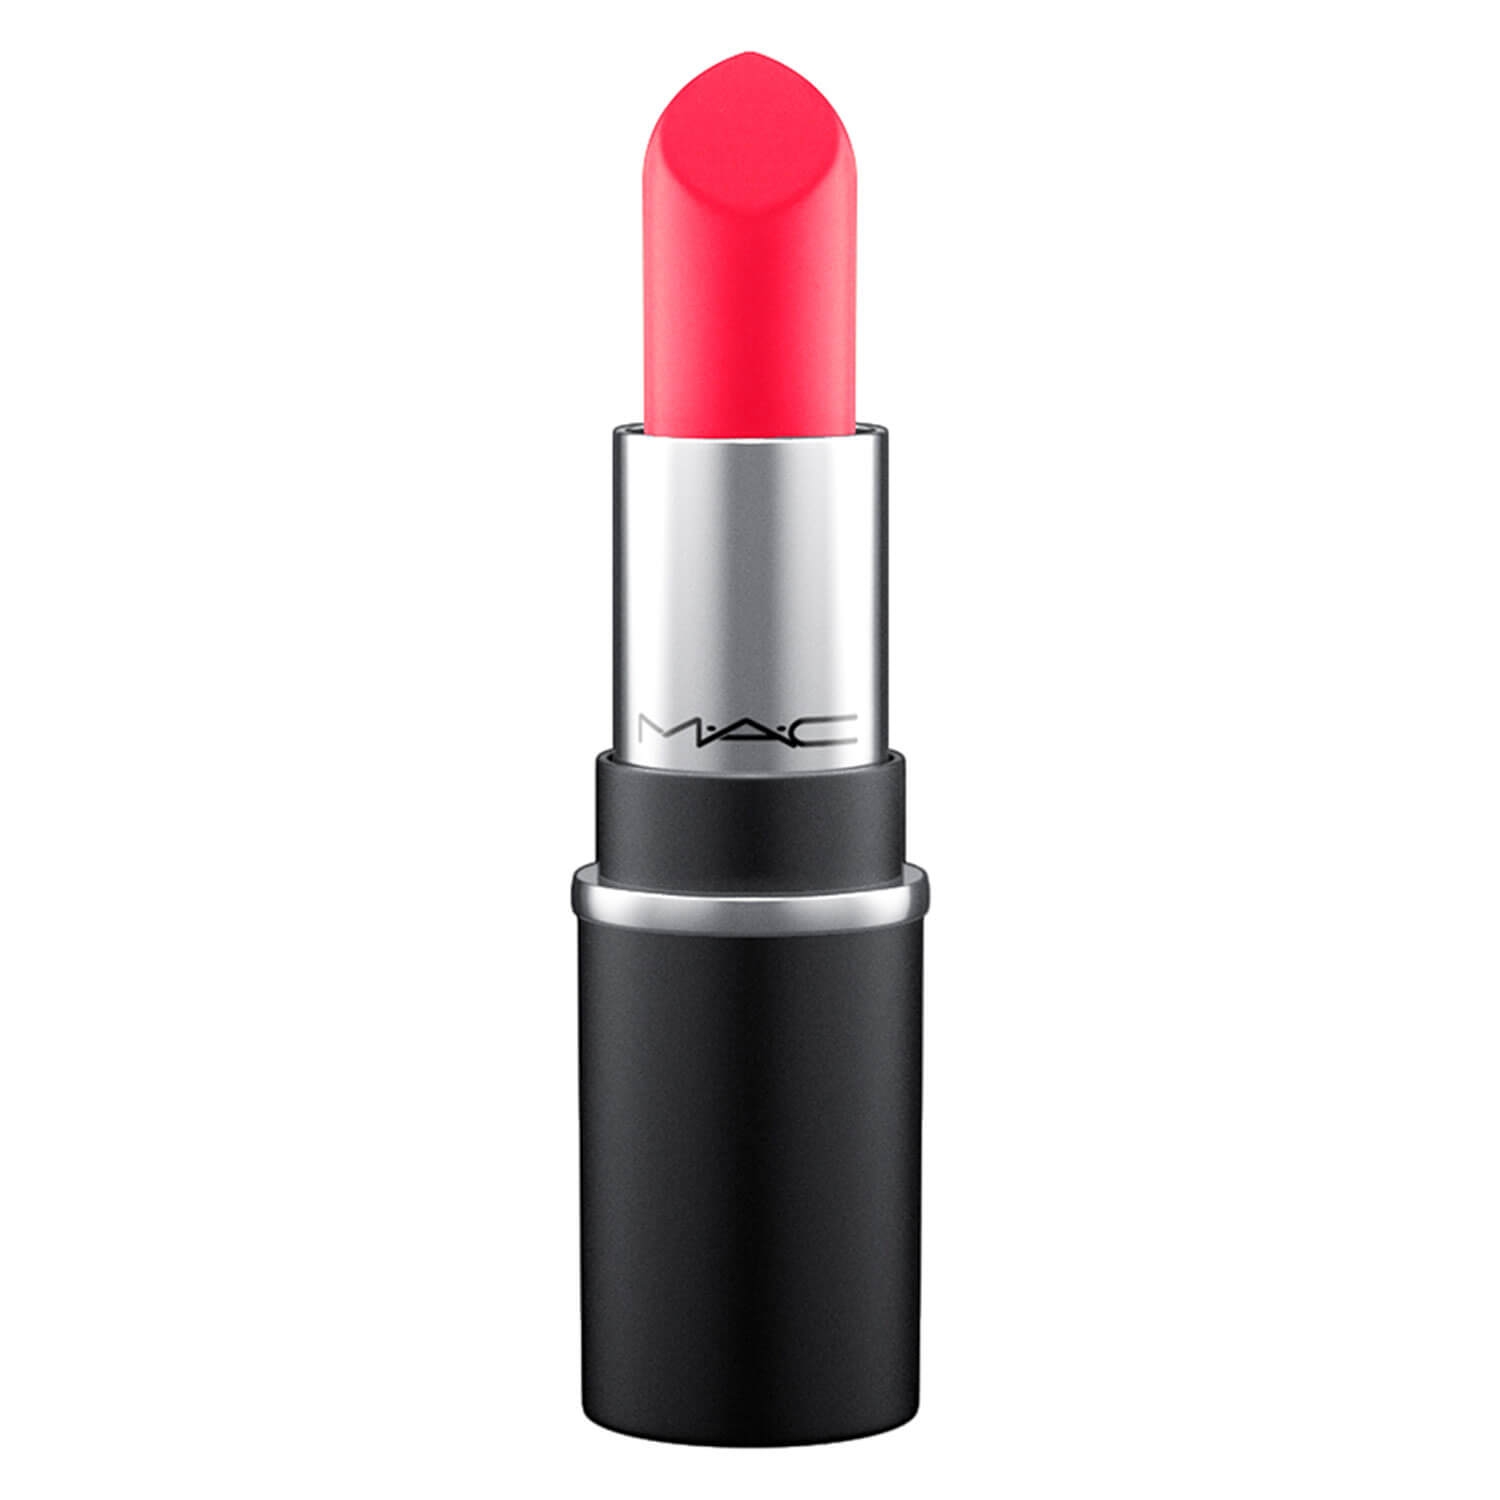 Product image from Little M·A·C - Retro Matte Lipstick Relentlessly Red